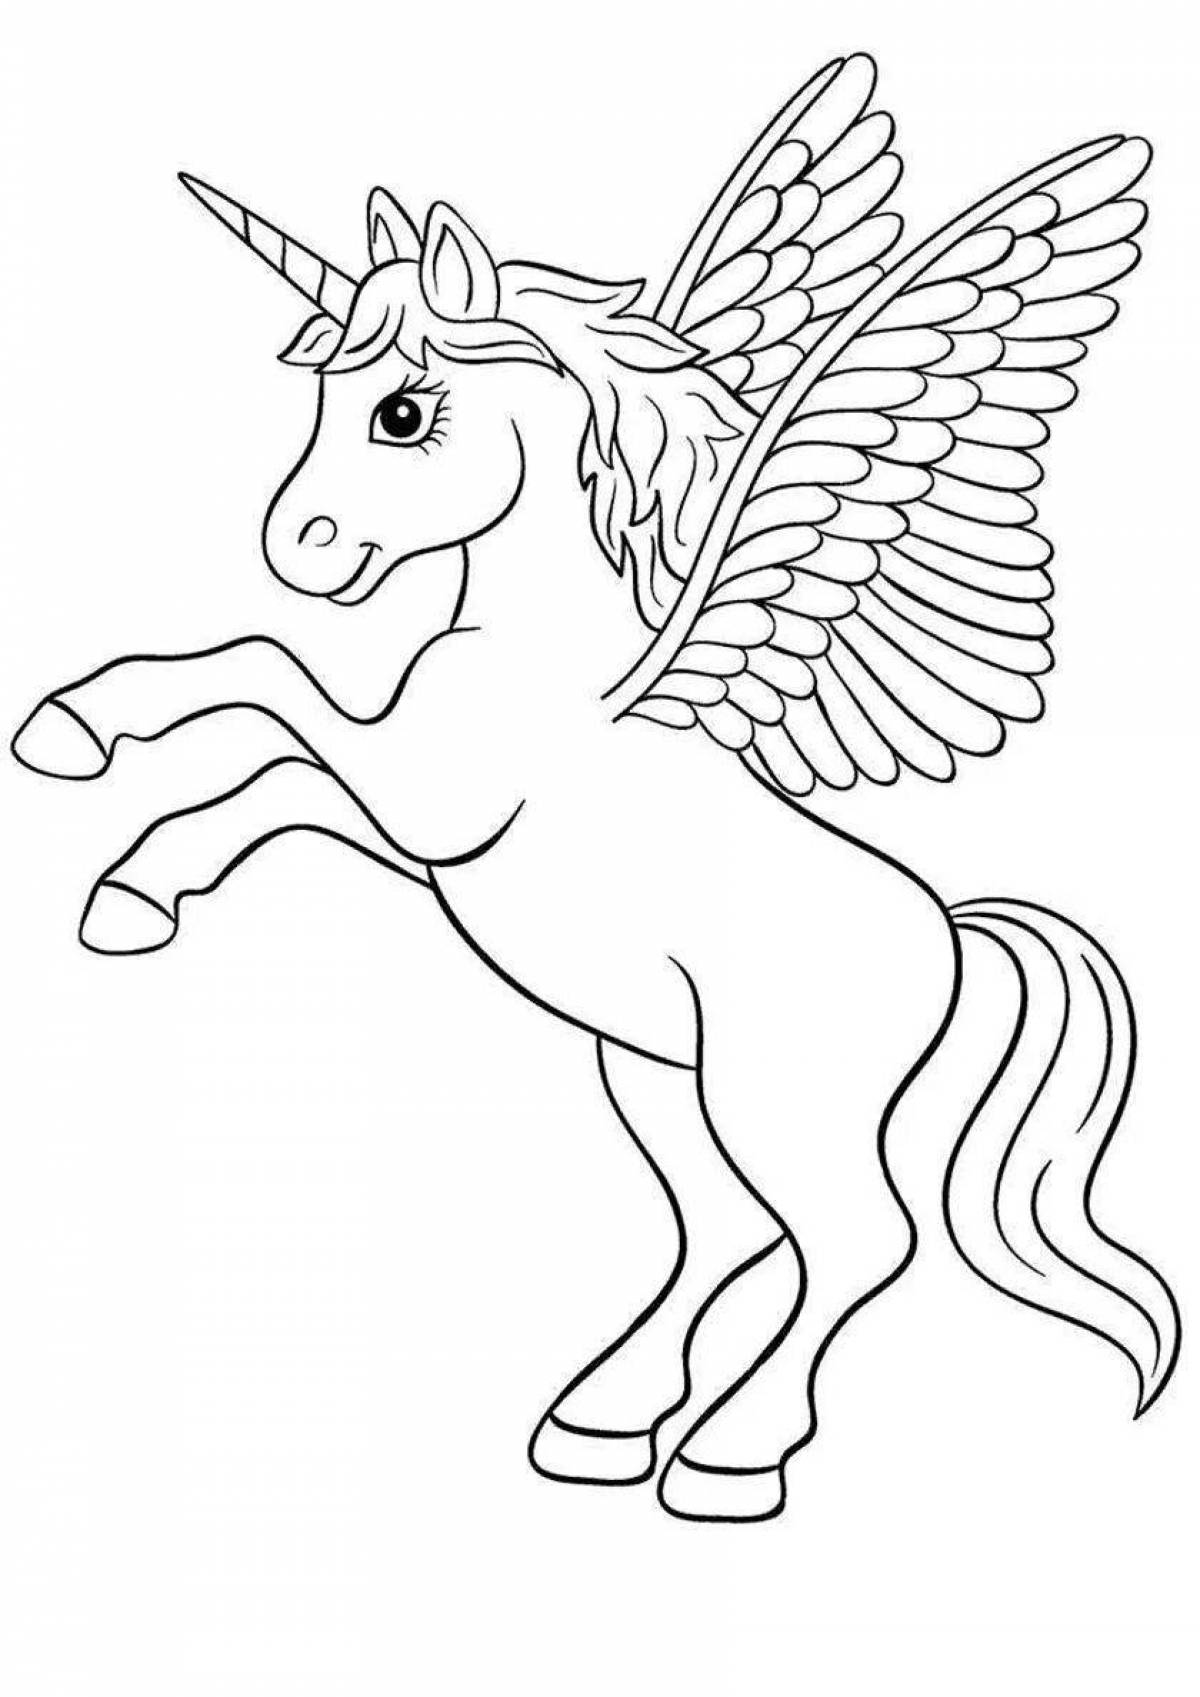 Lovely coloring picture of a unicorn for kids